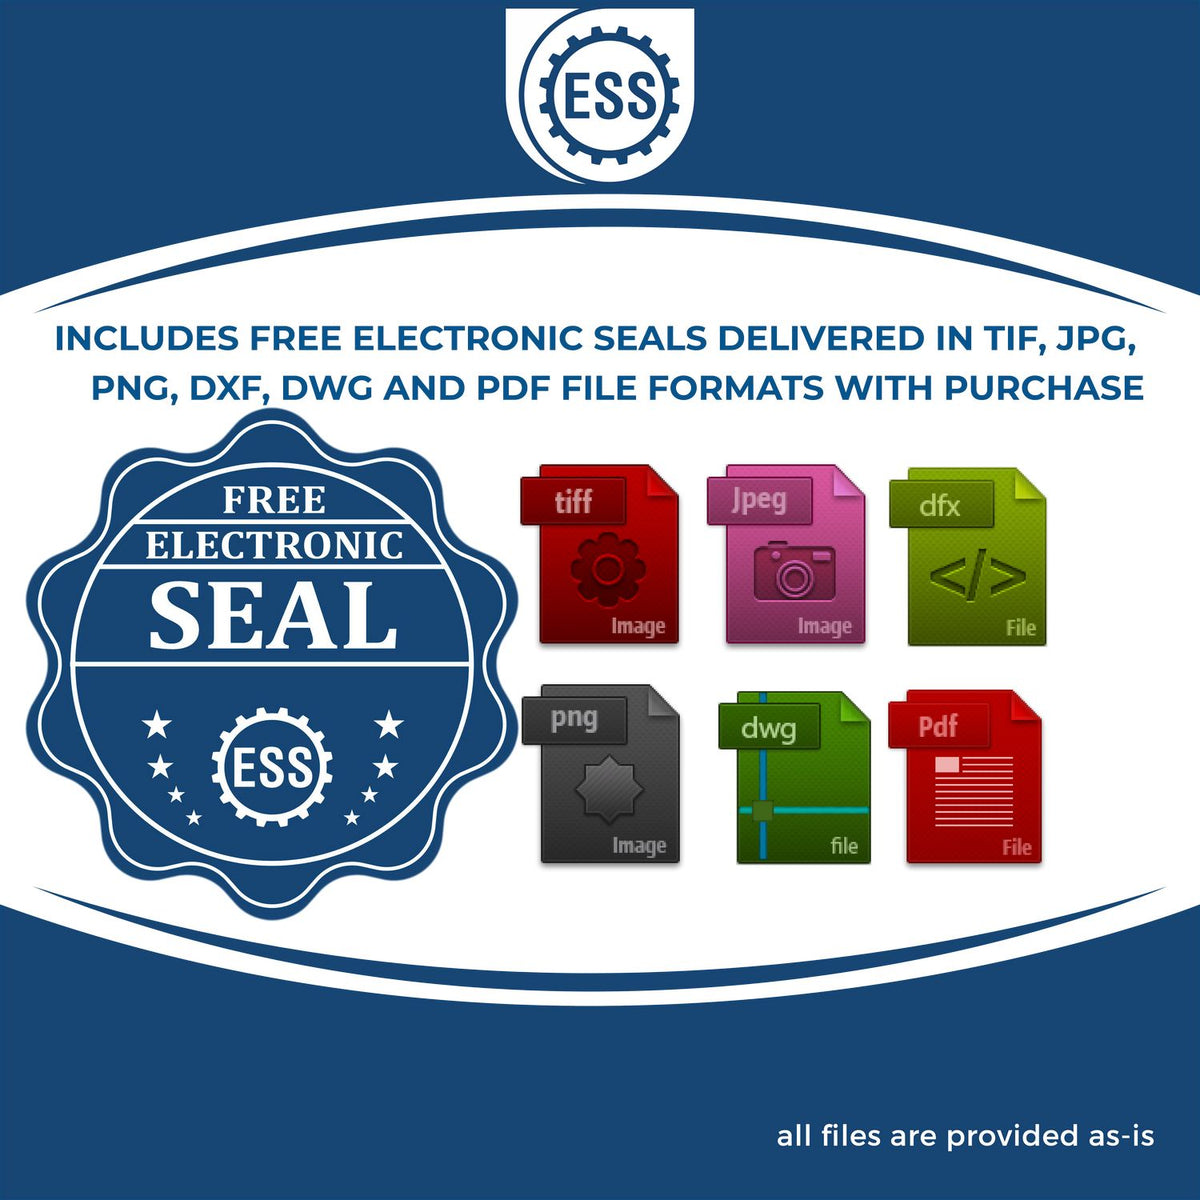 An infographic for the free electronic seal for the Gift Tennessee Architect Seal illustrating the different file type icons such as DXF, DWG, TIF, JPG and PNG.